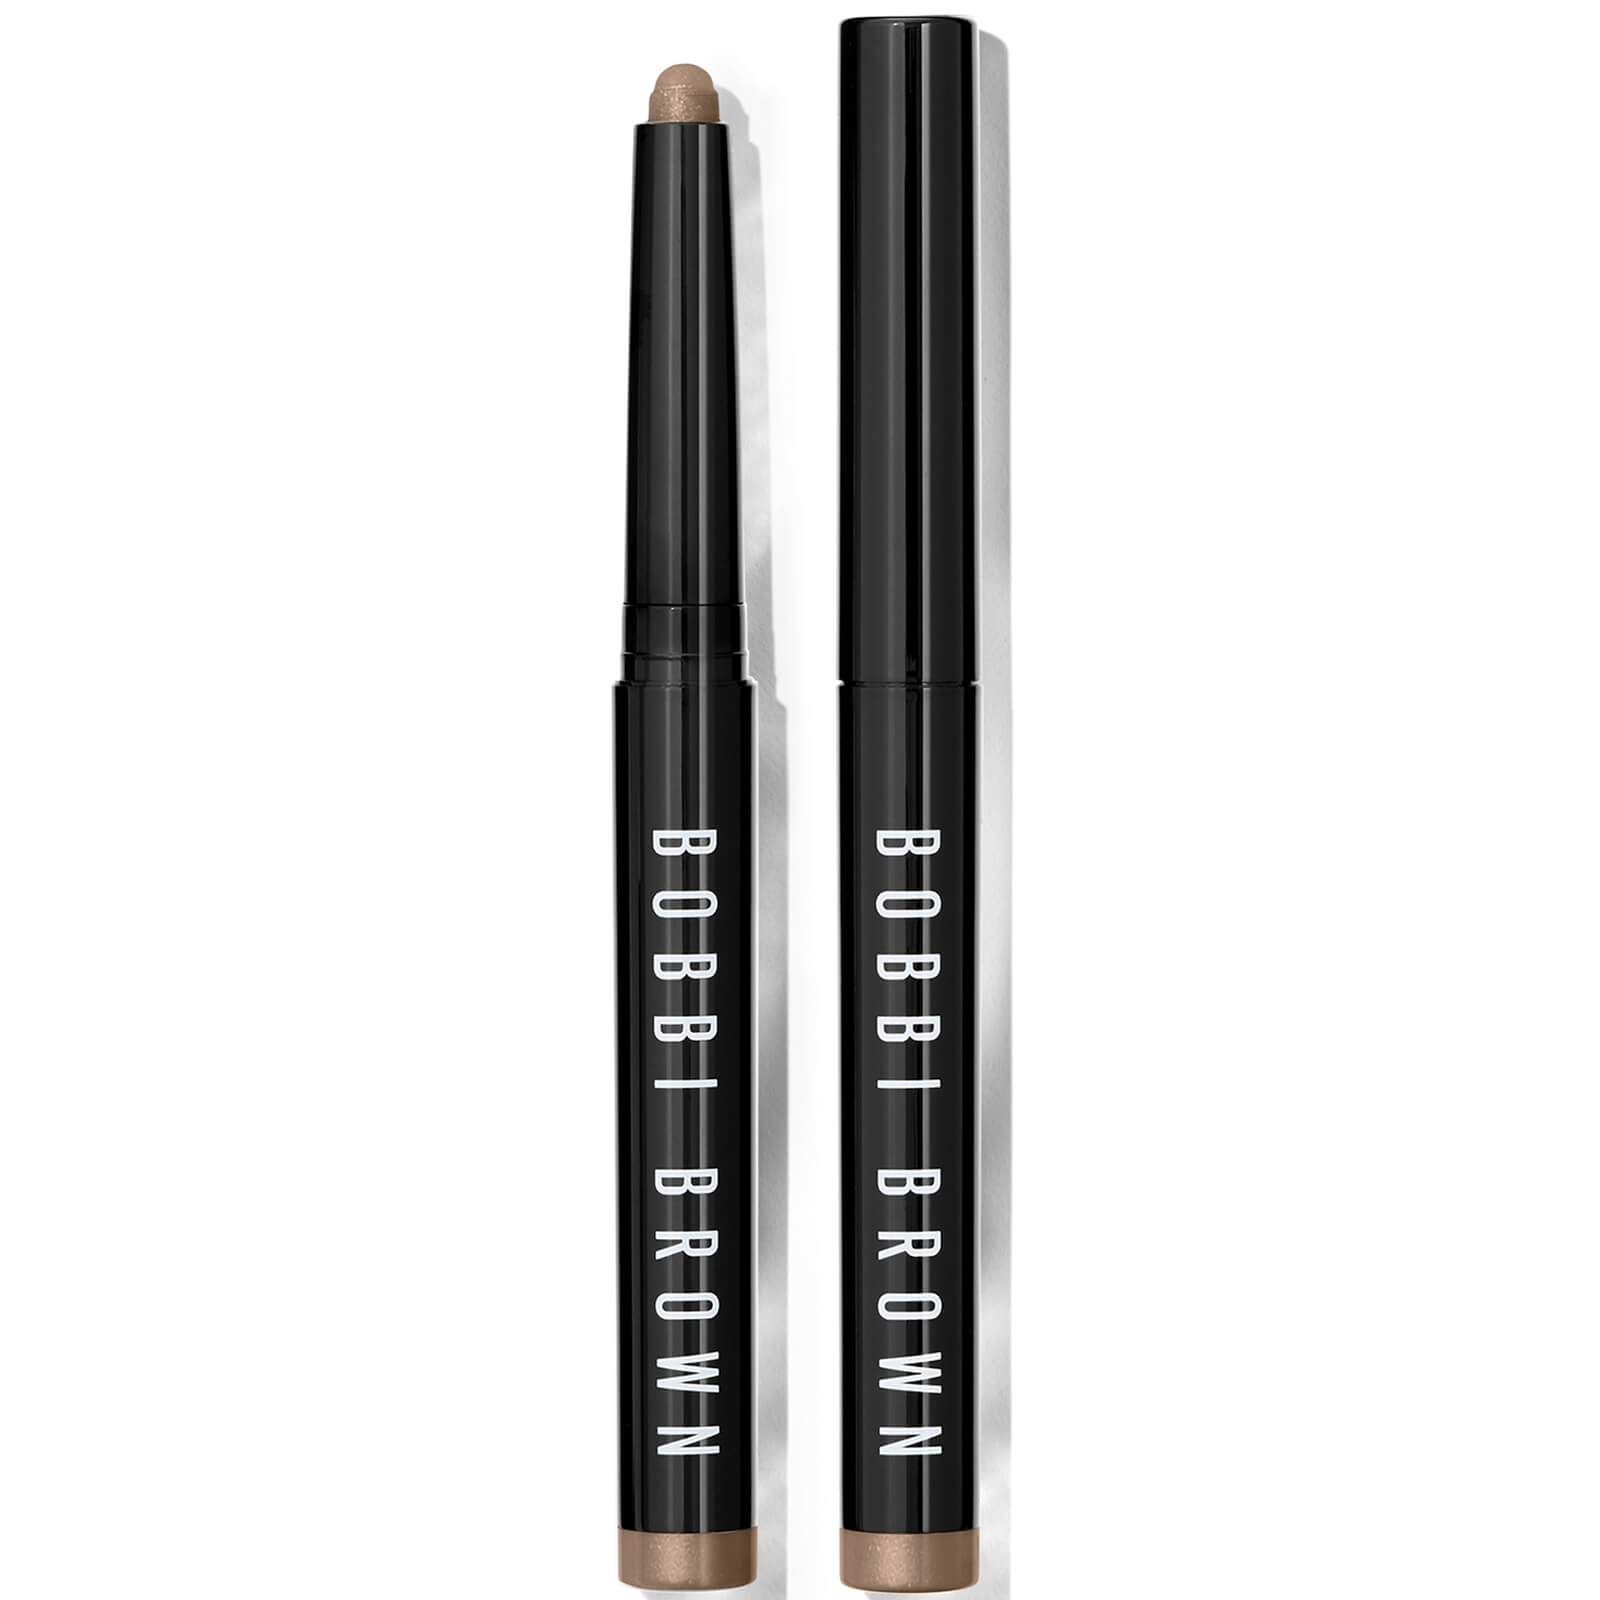 Bobbi Brown Long wear cream shadow Stick Shimmer Shades (Merry and Bright) Bronze